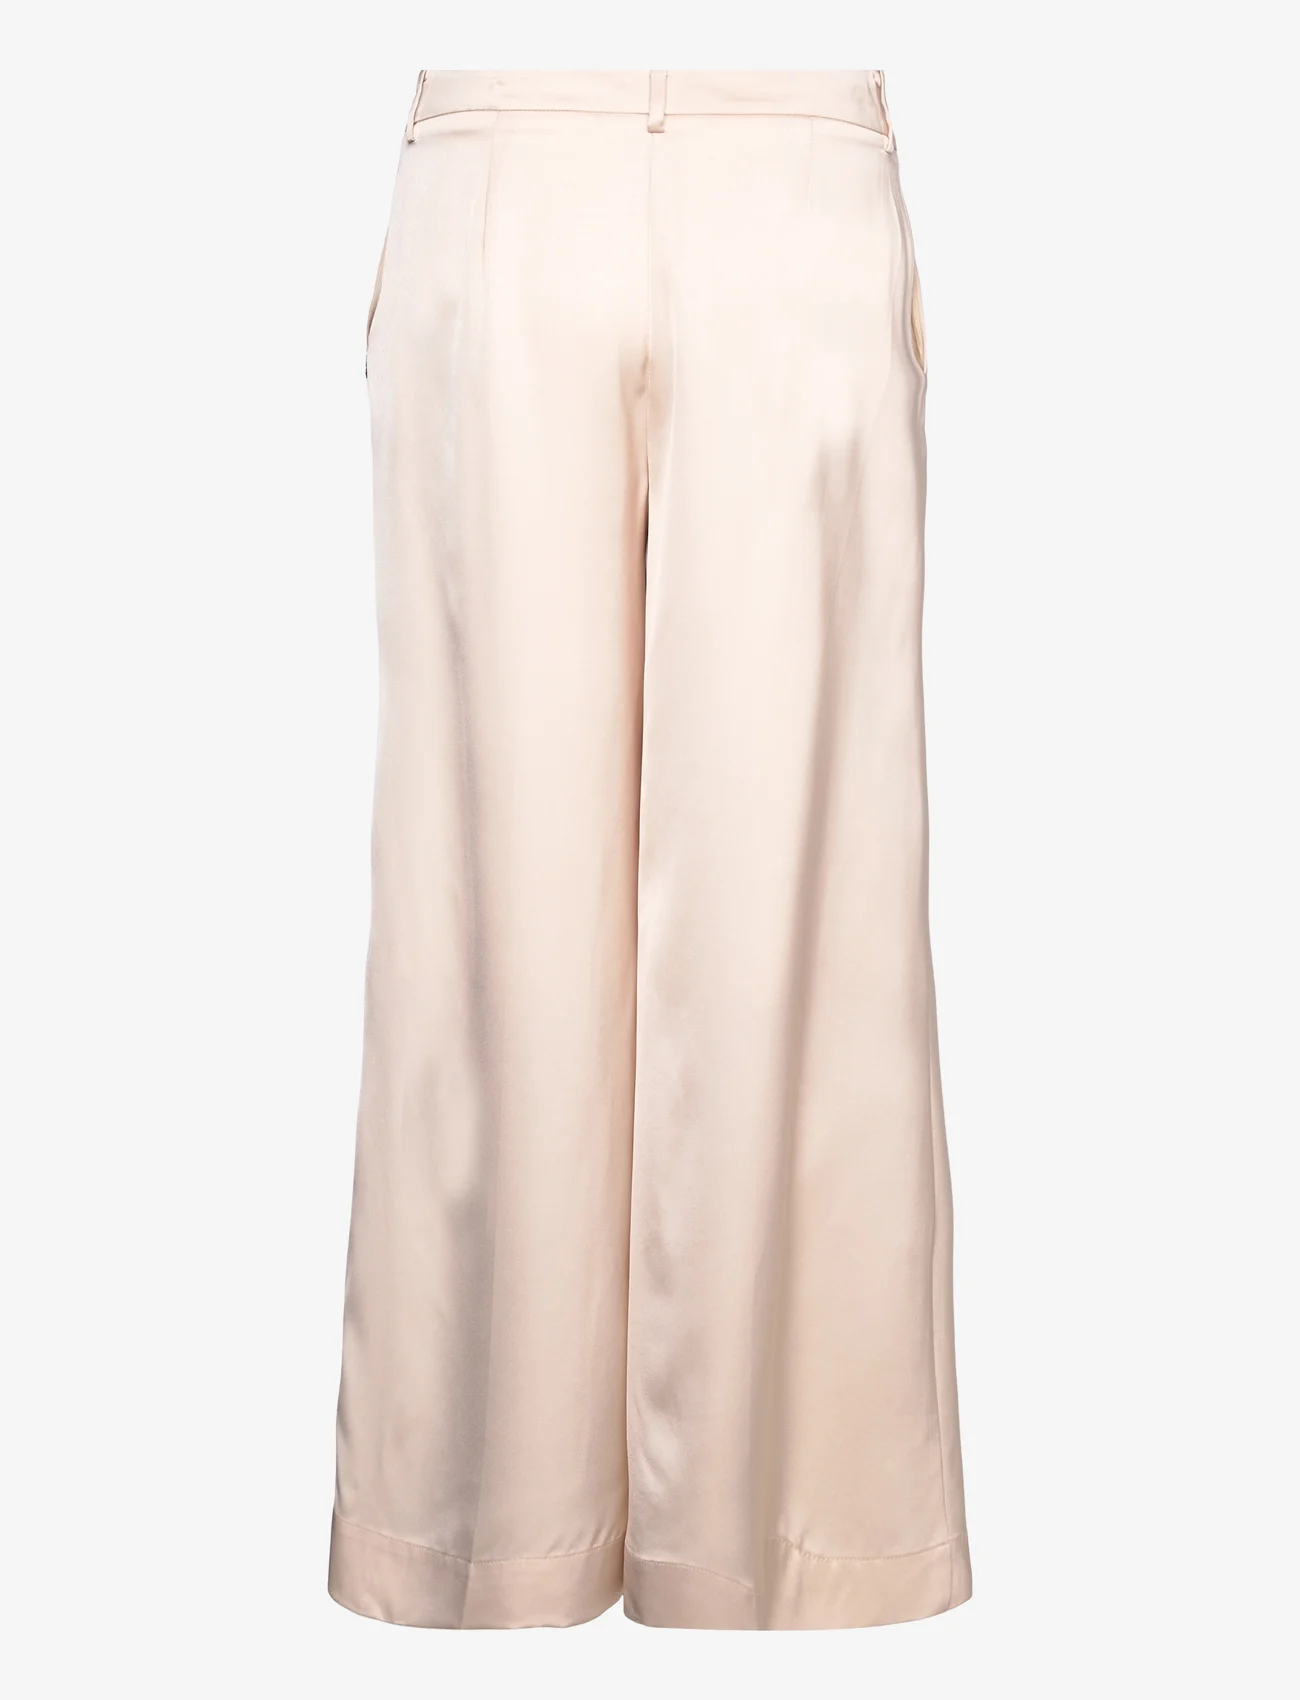 Coster Copenhagen - Pants with vide legs and press fold - juhlamuotia outlet-hintaan - light champagne - 1